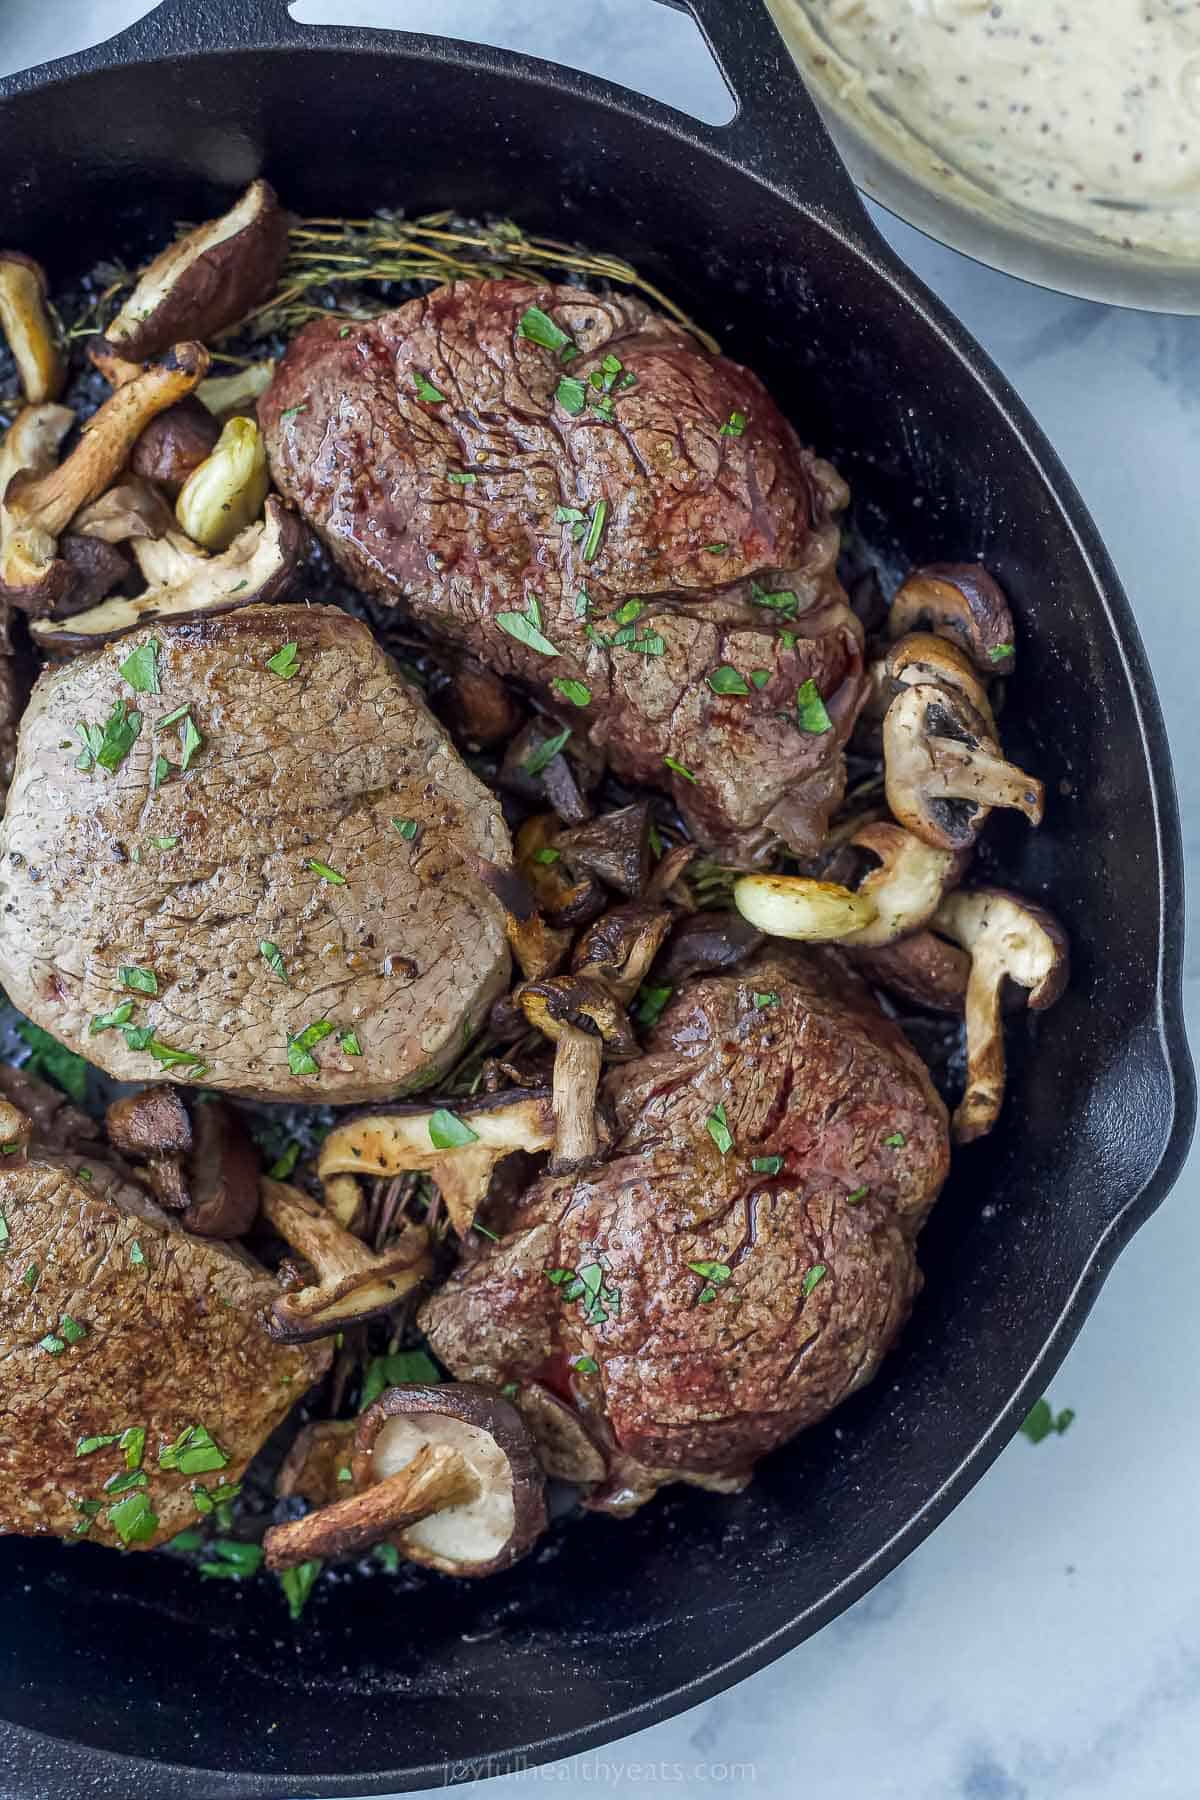 cast iron skillet with filet mignon cuts that have been cooked with mushrooms